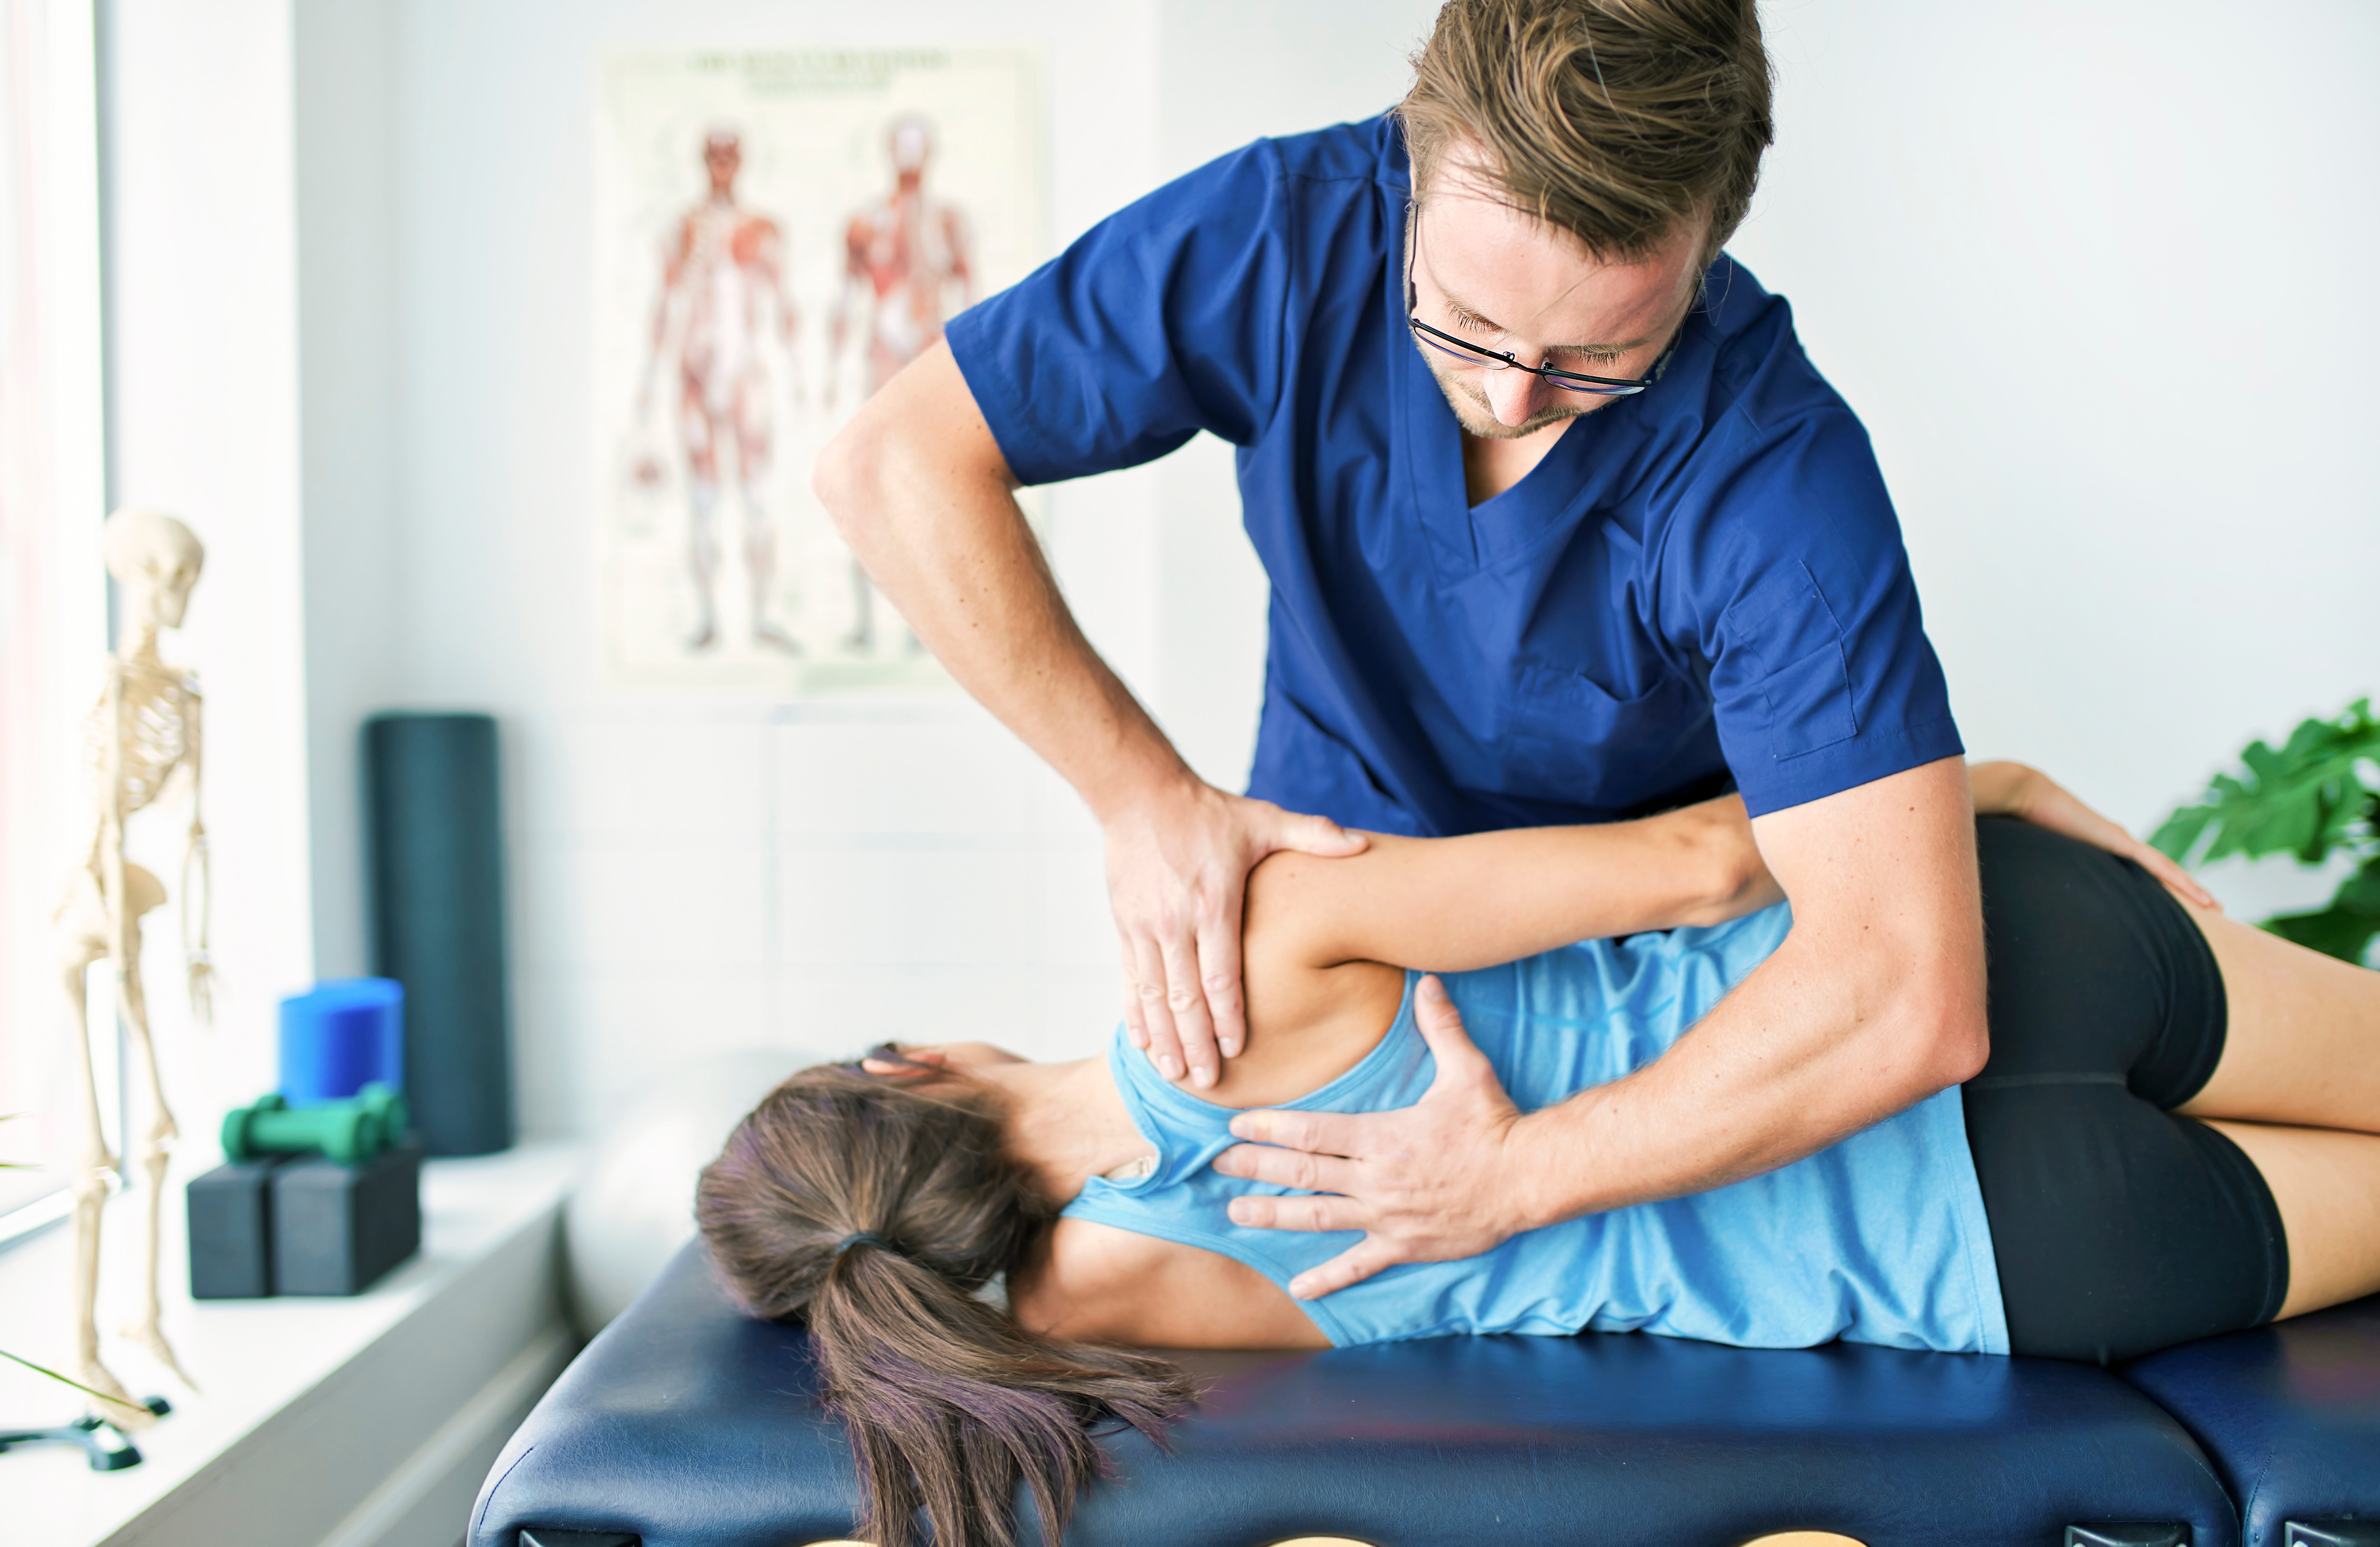 Where You Can Easily Find the Best Coaching for Chiropractors?